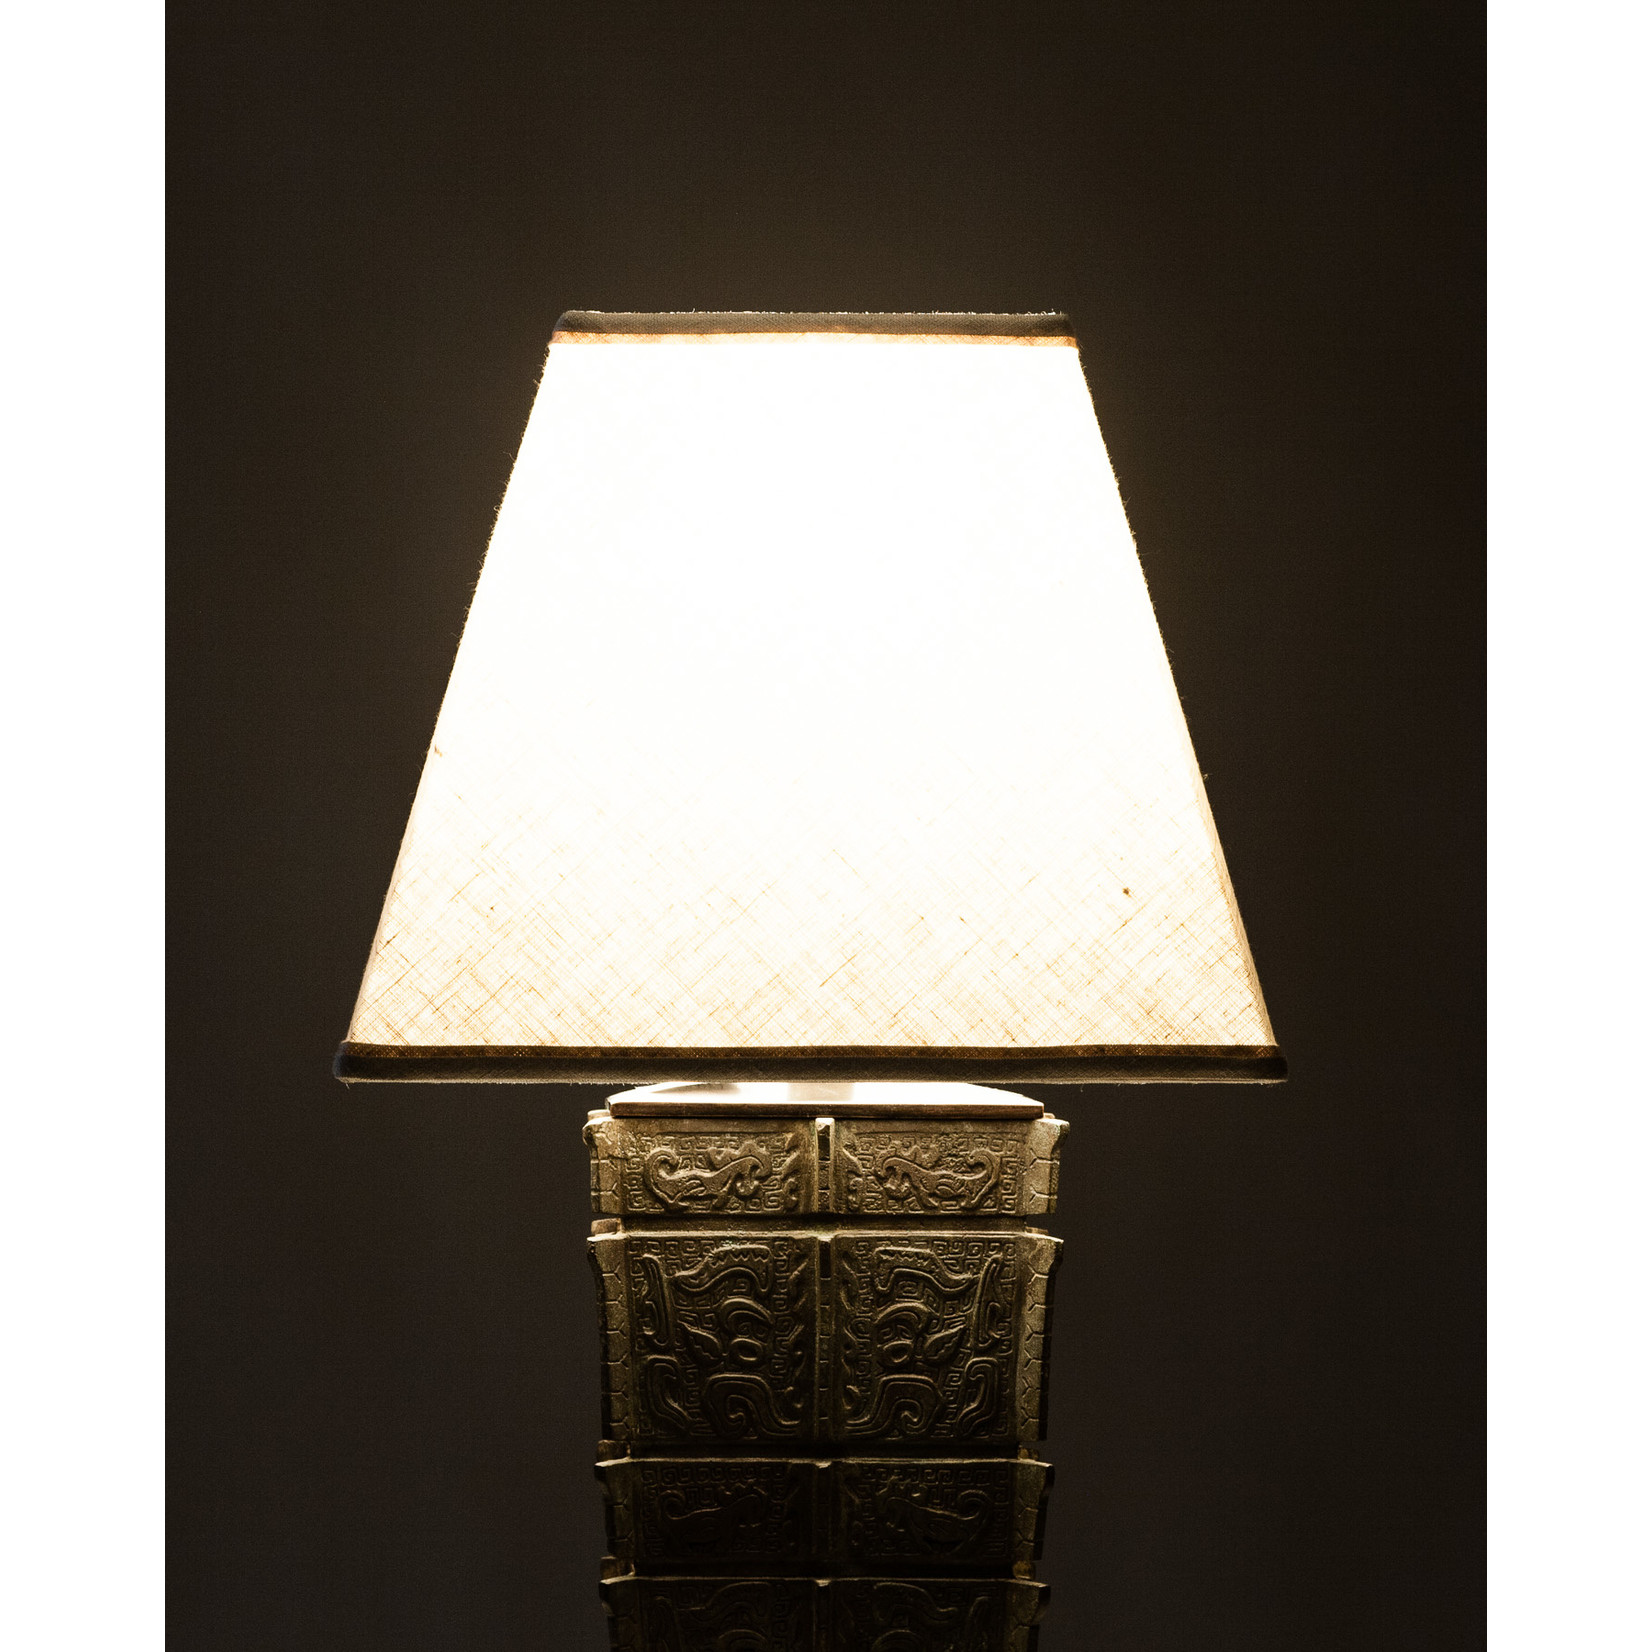 Lawrence & Scott Nelson Table Lamp in Archaic Bronze